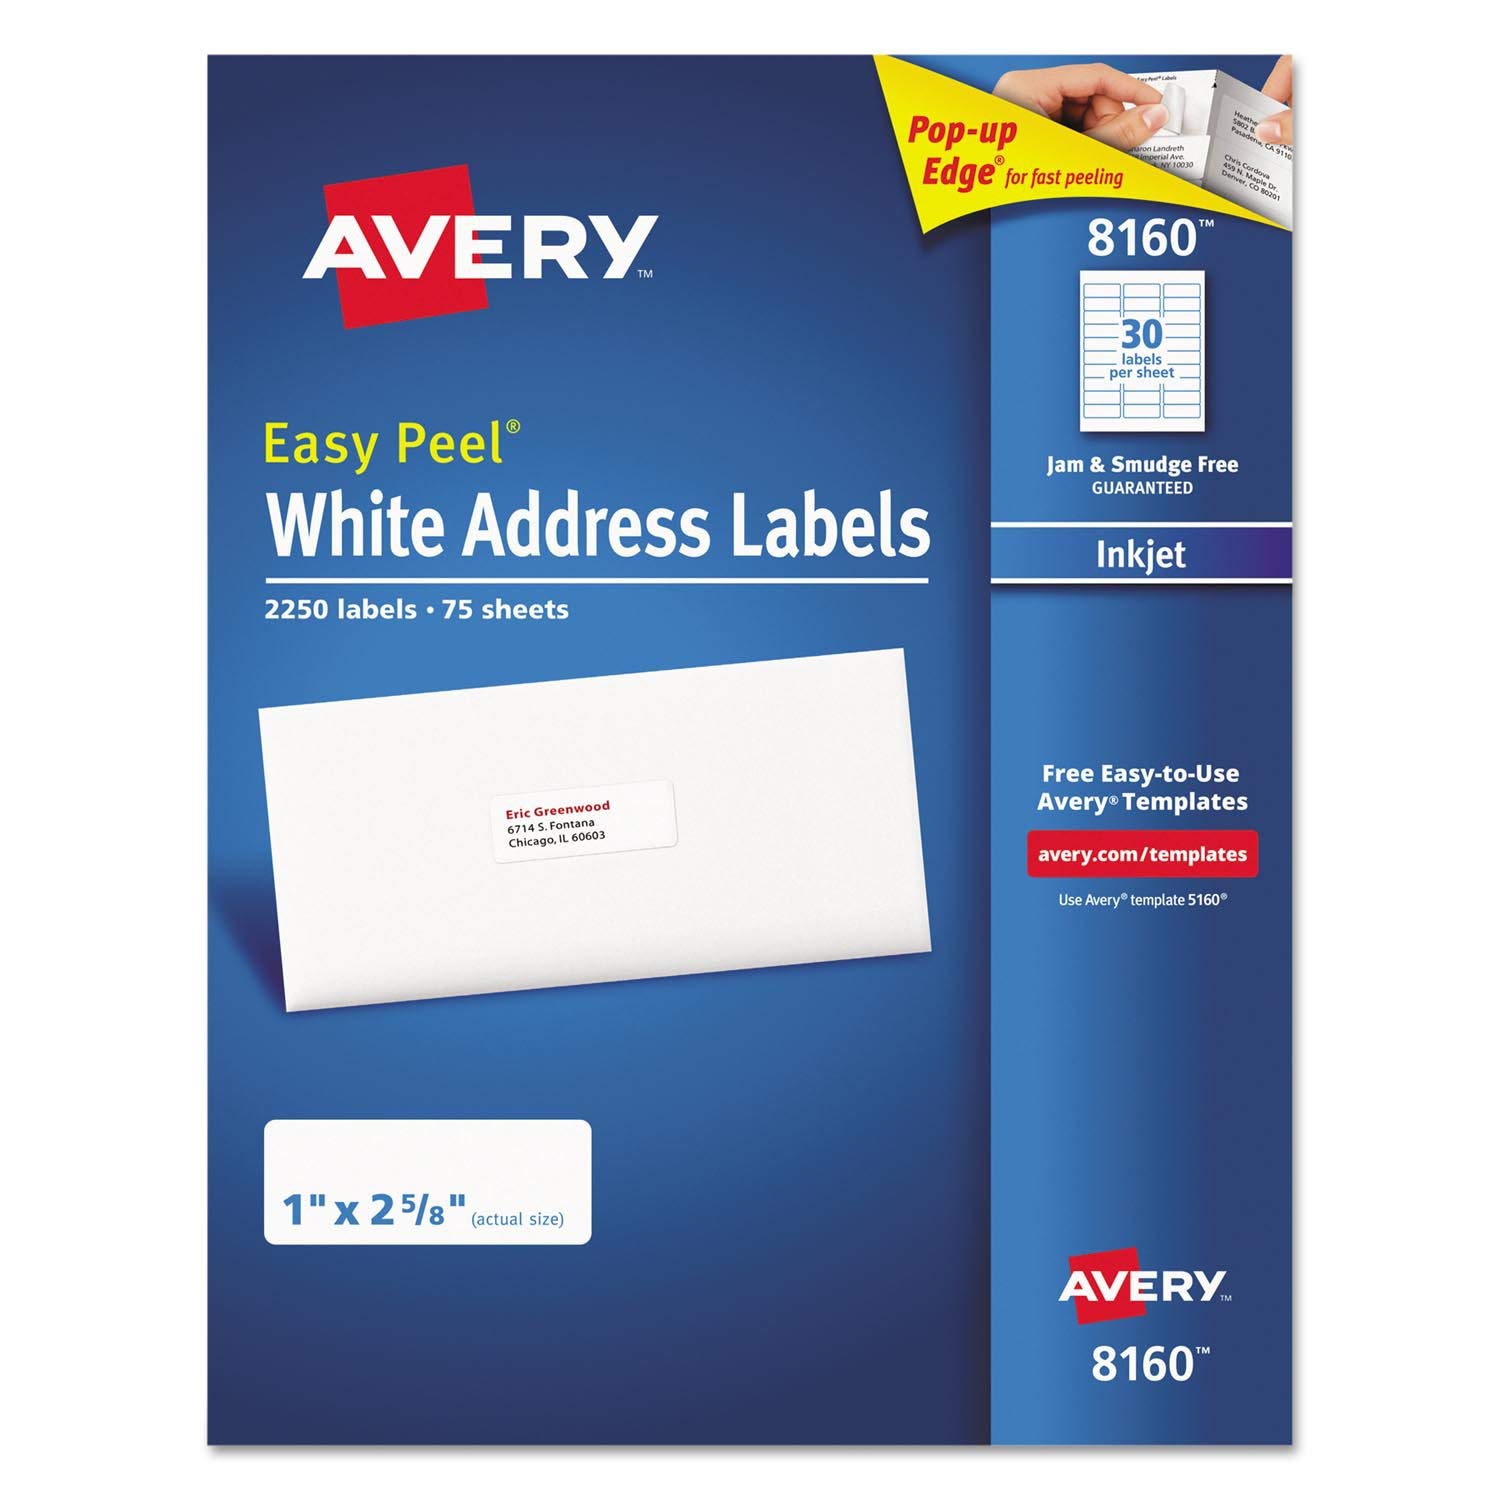 Avery 5160 Template Avery Label Templates Belgralb Find The Most 